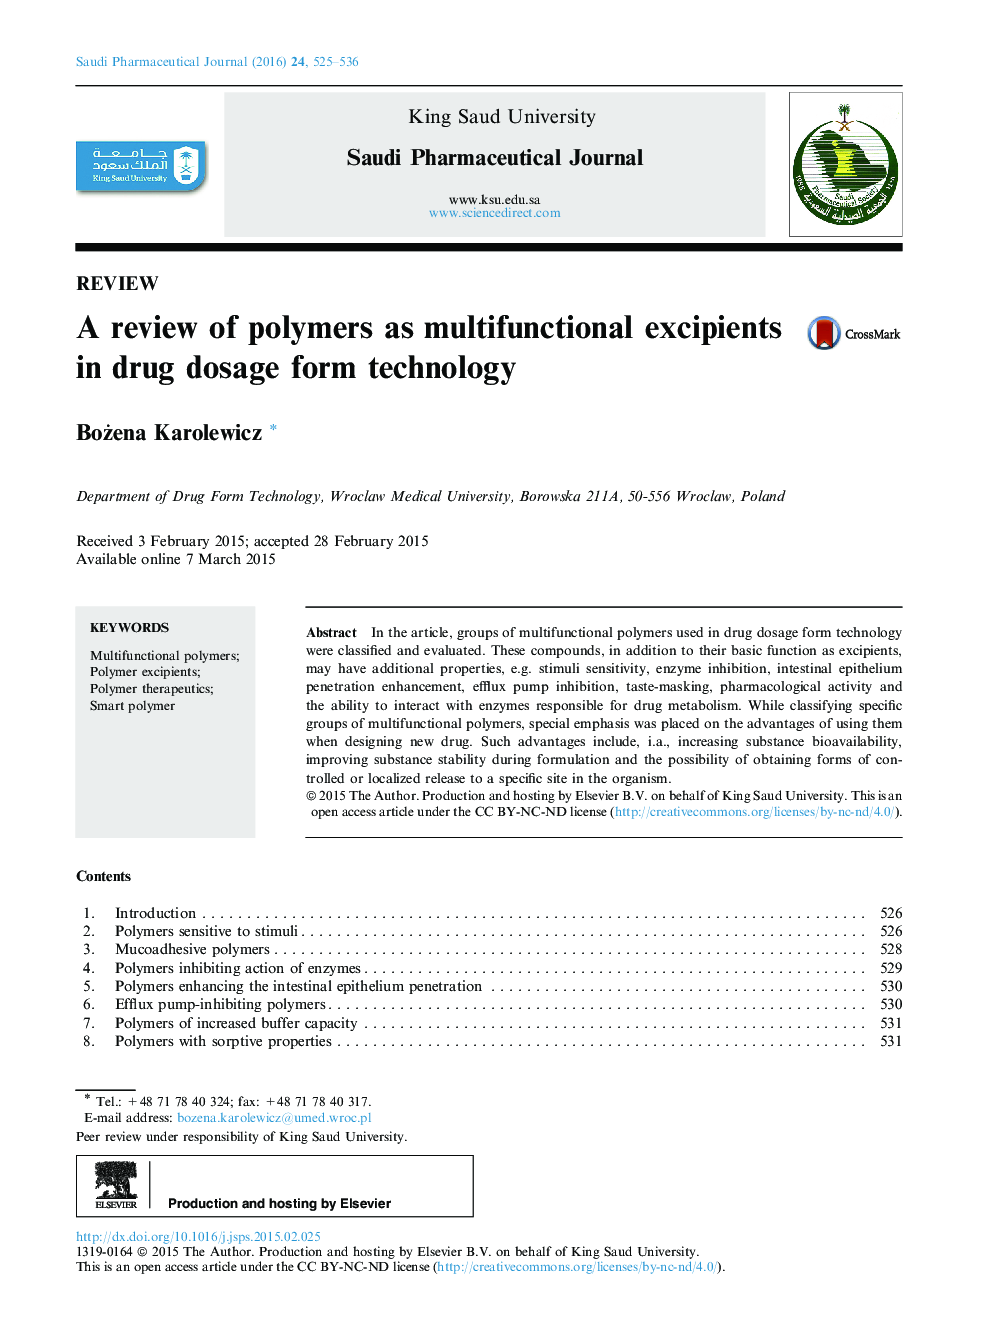 A review of polymers as multifunctional excipients in drug dosage form technology